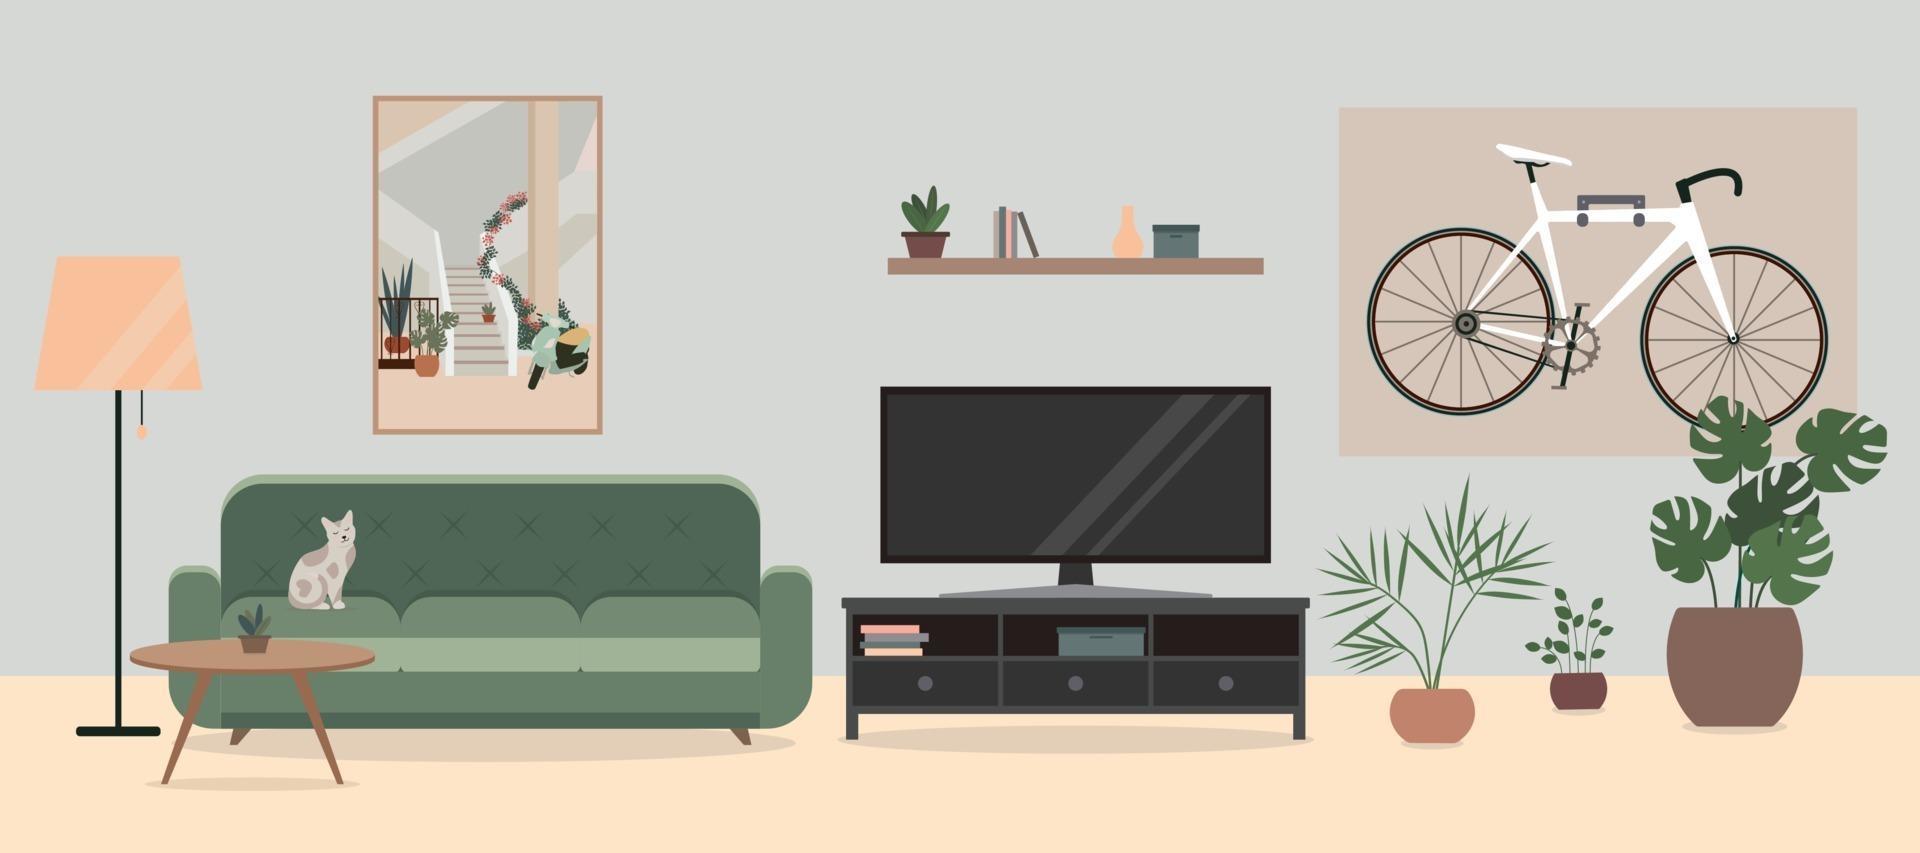 Cozy Living room interior with TV, sofa, flowers in pots, and a bicycle. Bike hanging on the wall in living room. vector